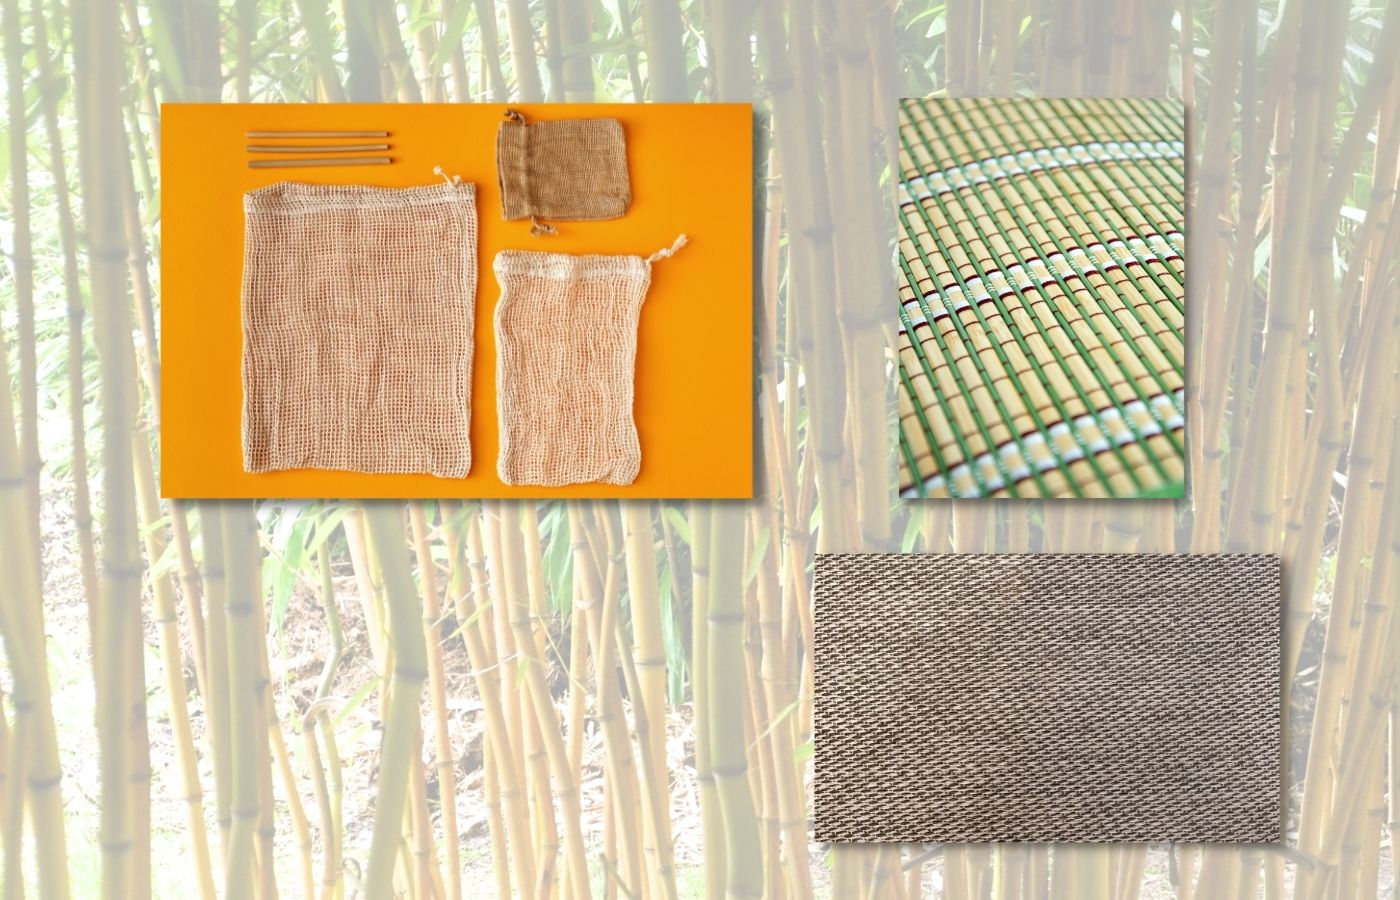 What are the disadvantages of bamboo fiber?